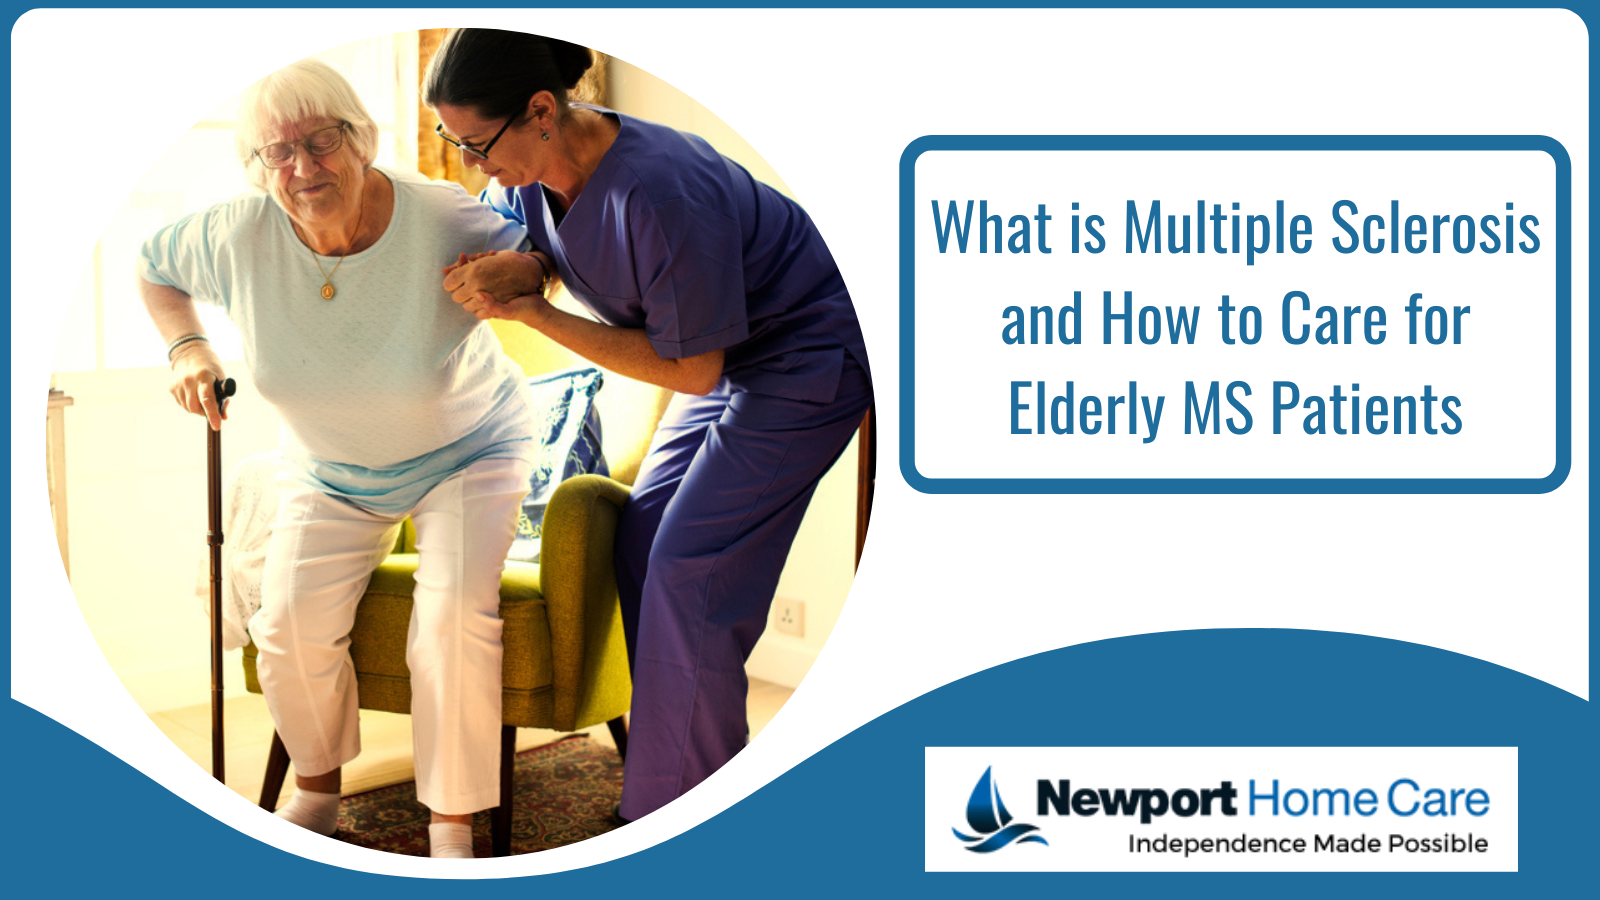 What is Multiple Sclerosis and How to Care for Elderly MS Patients